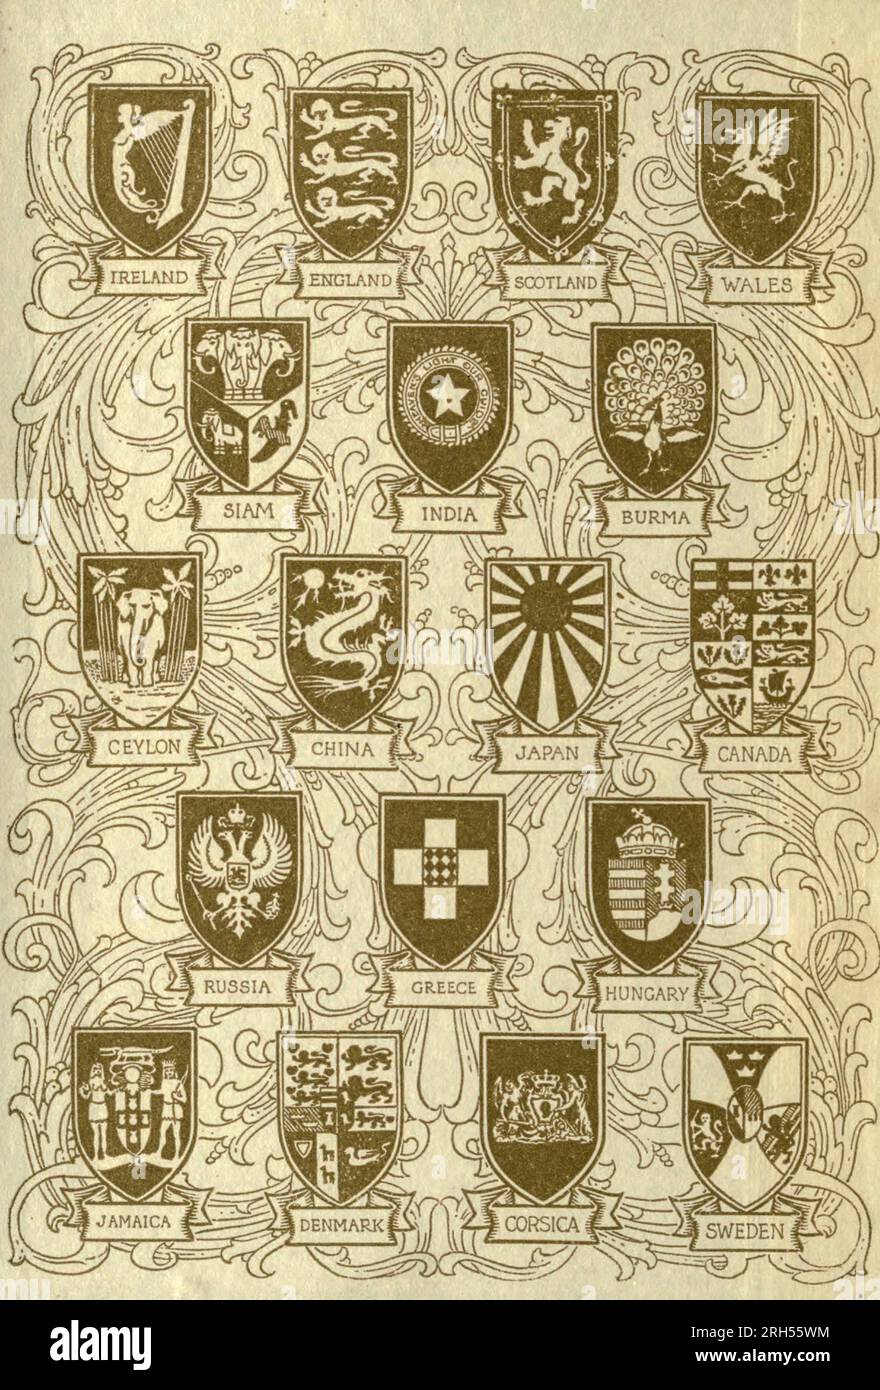 Collection of National Coat of arms Ireland, England, Scotland, Wales, Siam, India, Burma, Ceylon, China, Japan, Canada, Russia, Greece, Hungary, Jamaica, Denmark, Corsica, Sweeden, from the book ' Japan ' part of the series ' Peeps of History ' by John Finnemore Illustrated by Ella Du Cane Ella Du Cane (1874-1943) was a British artist best known for her watercolors of landscapes and exotic locales. Publication date 1910 Publisher London : Adam and Charles Black Stock Photo